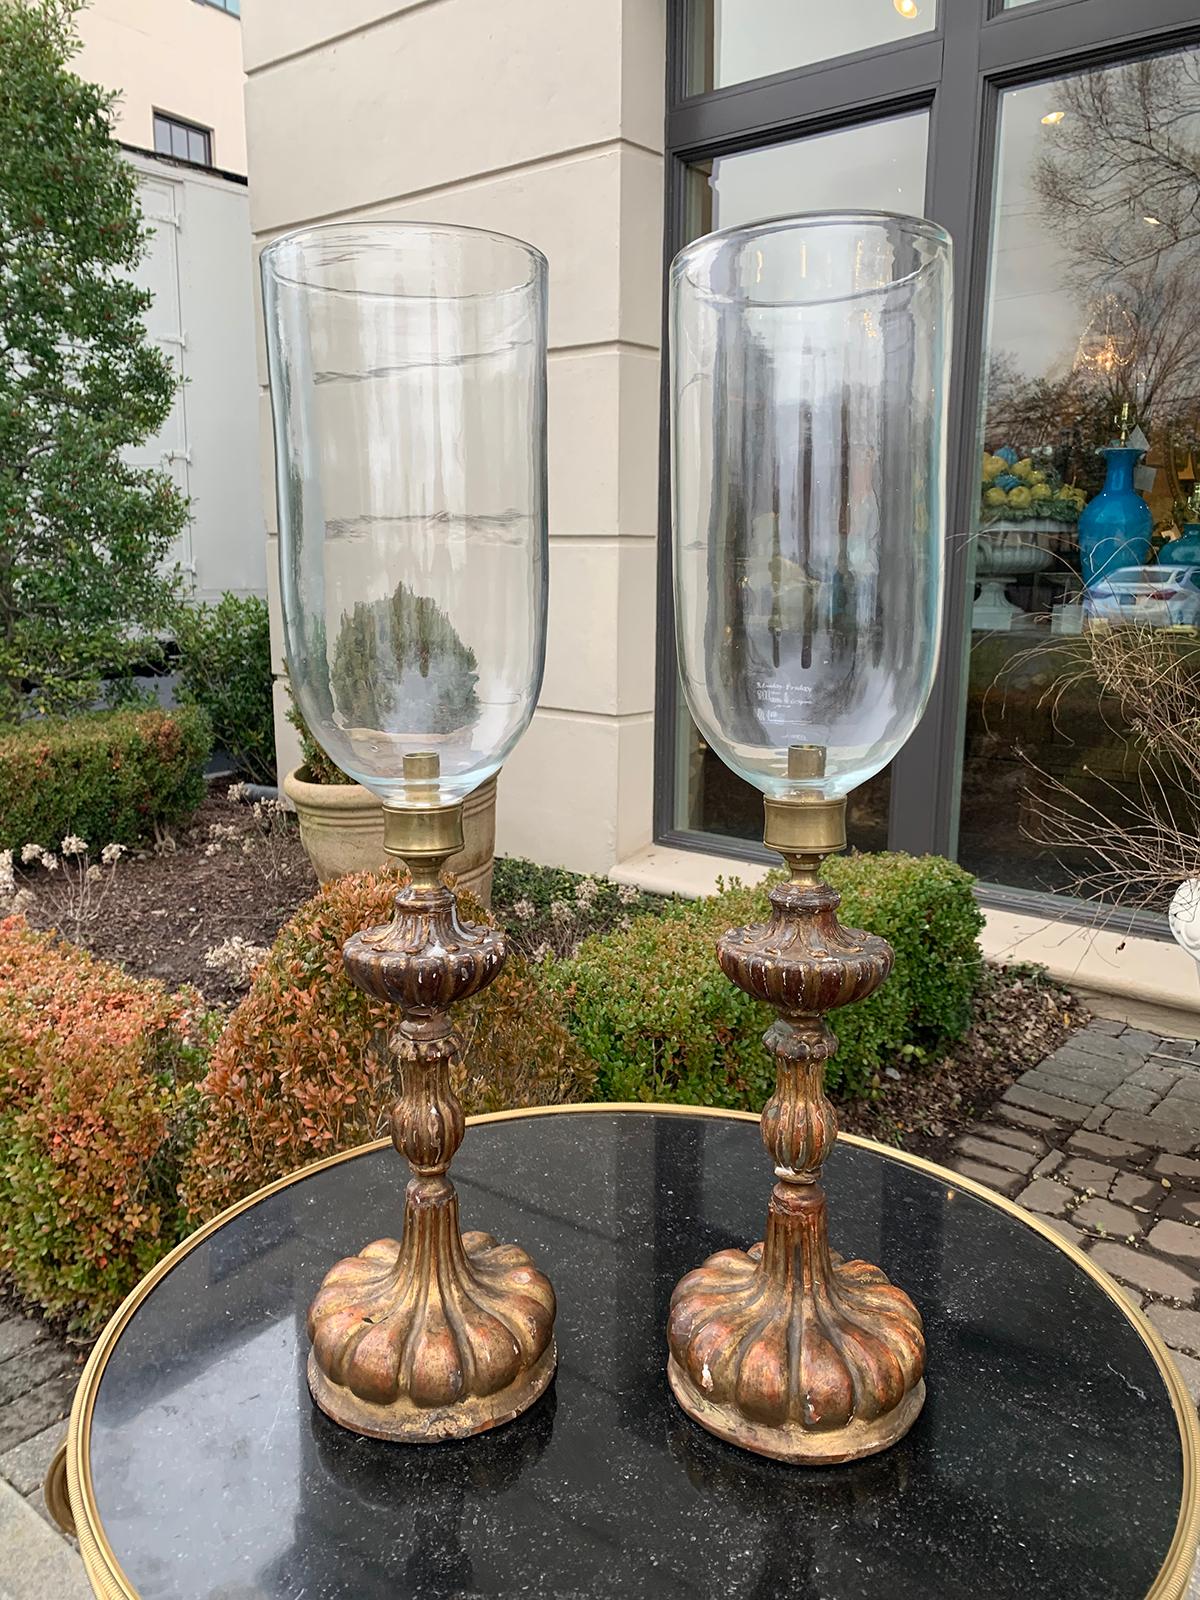 Pair of 20th century Italian giltwood candlesticks with hand blown glass photophores, circa 1930s.